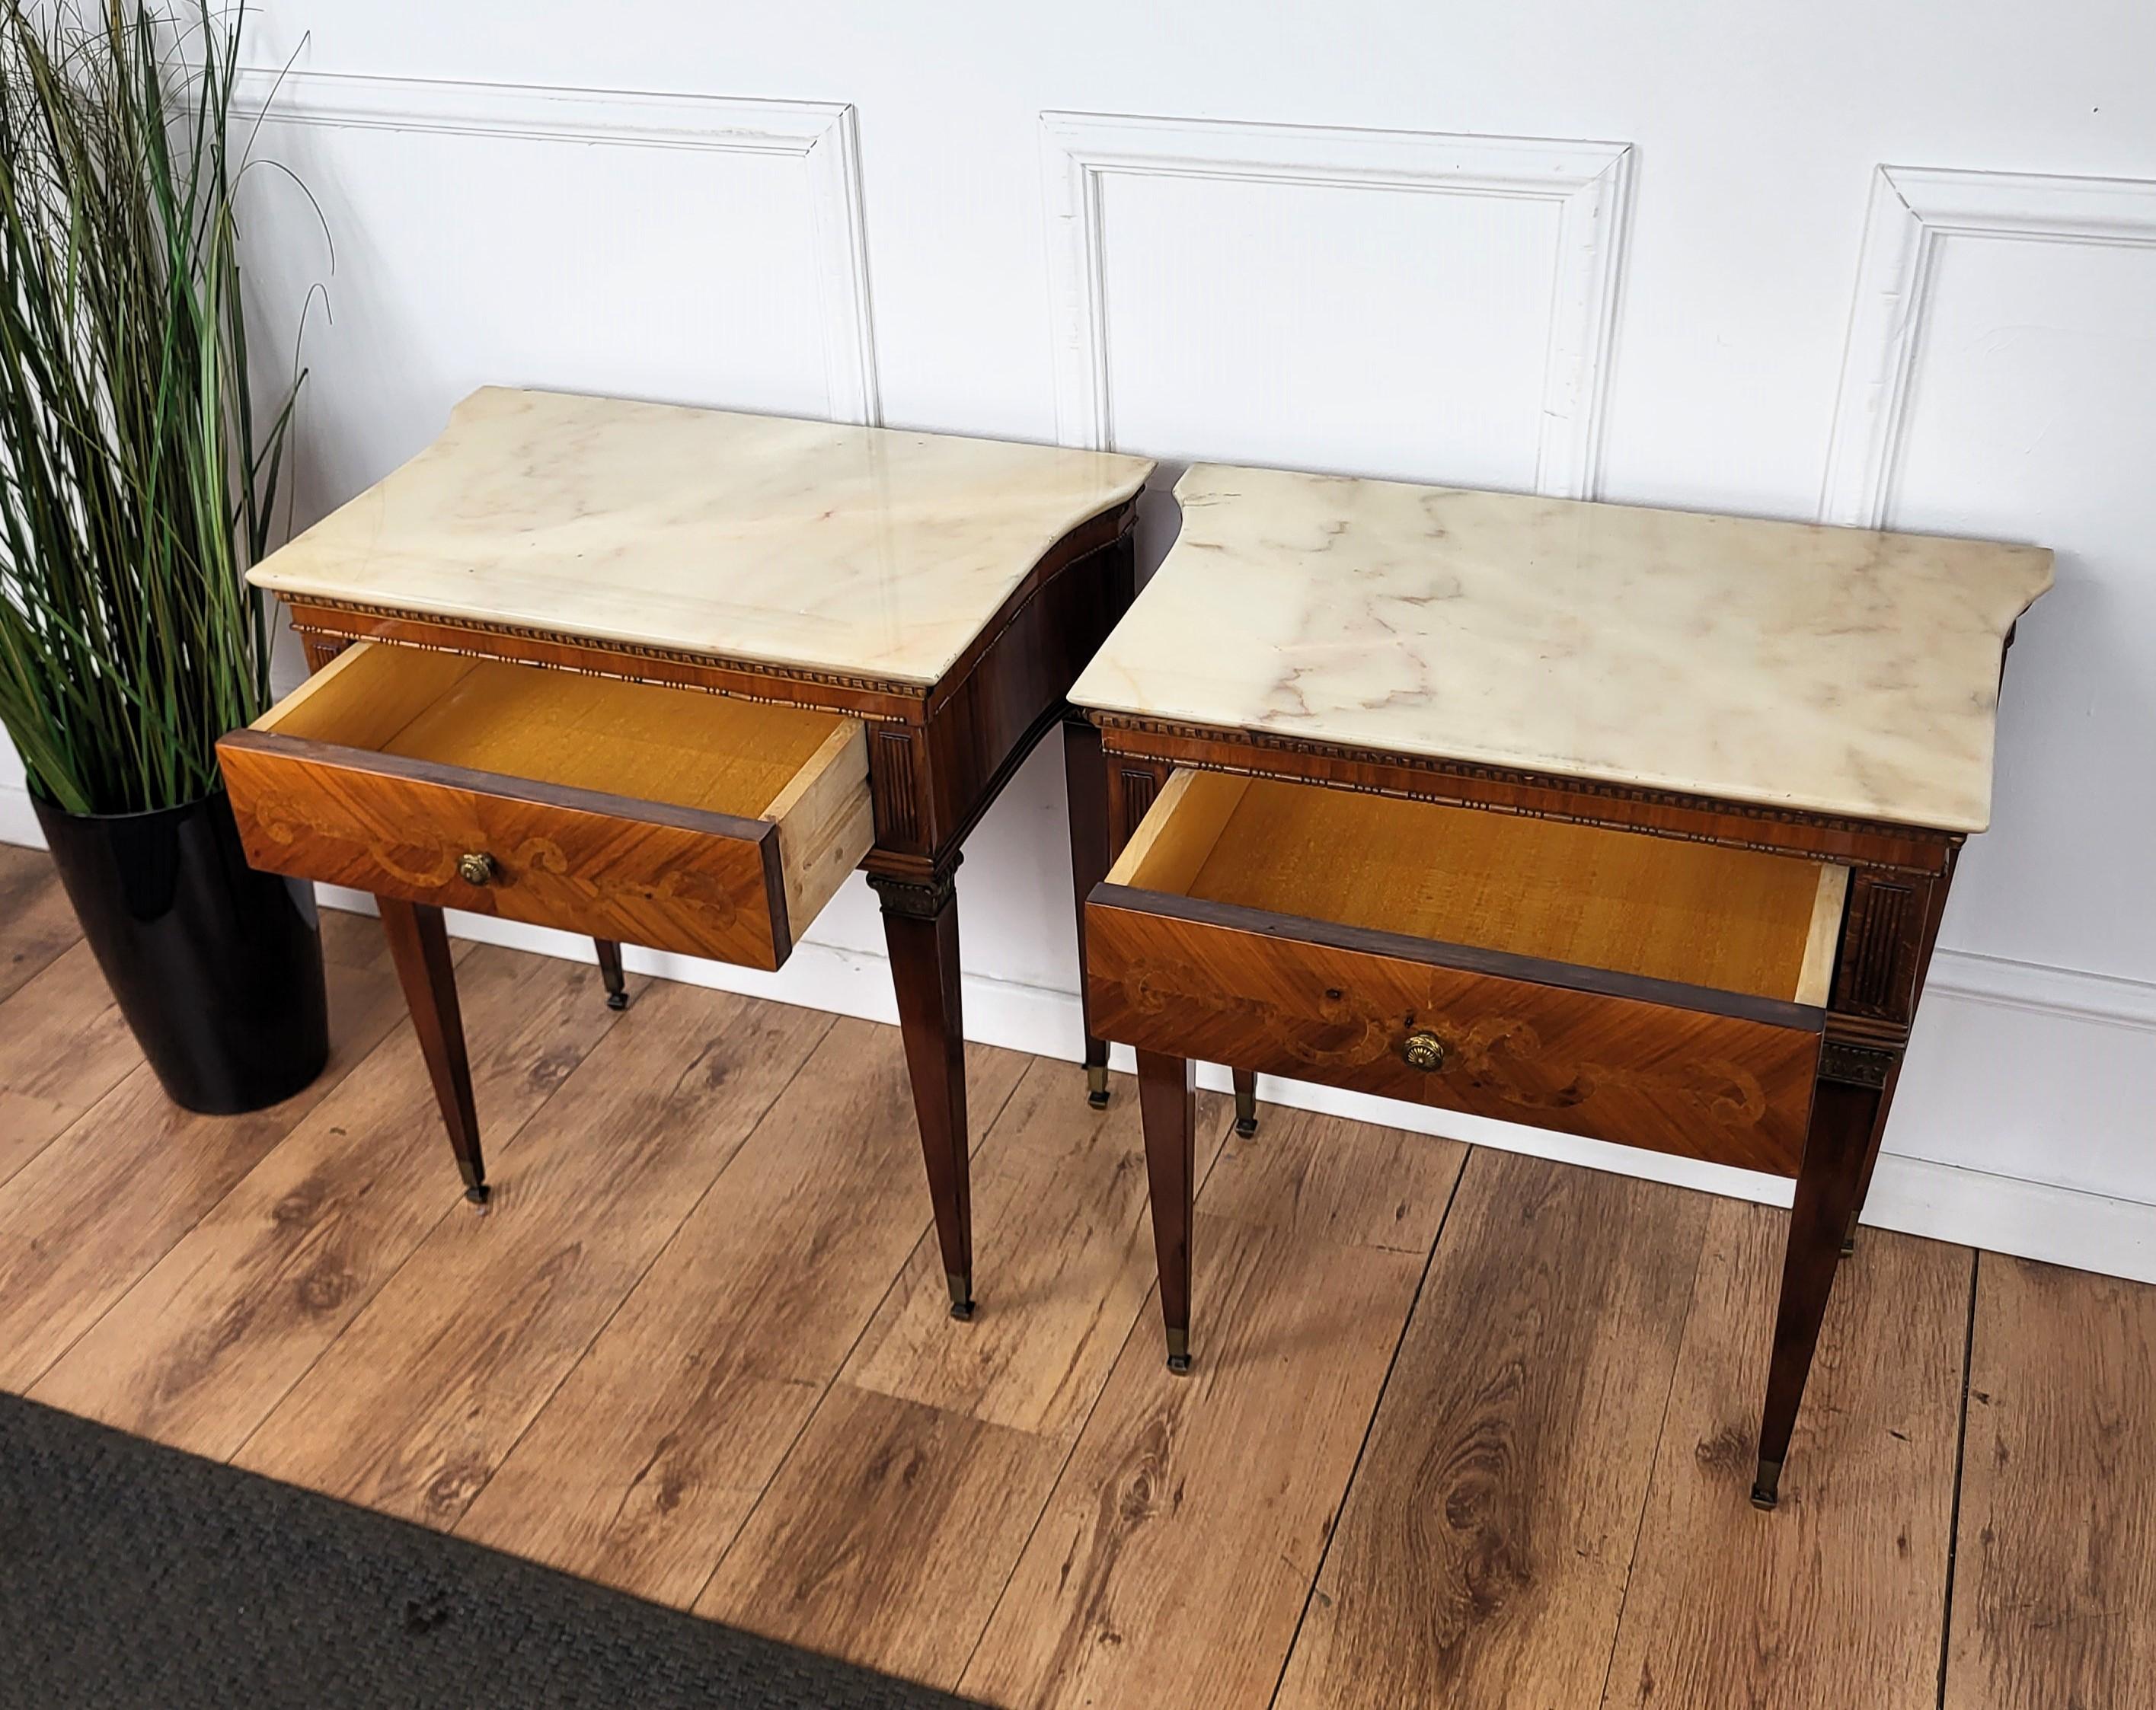 Pair of Italian Art Deco Marquetry Wood Marble Top Night Stands Bedside Tables 1